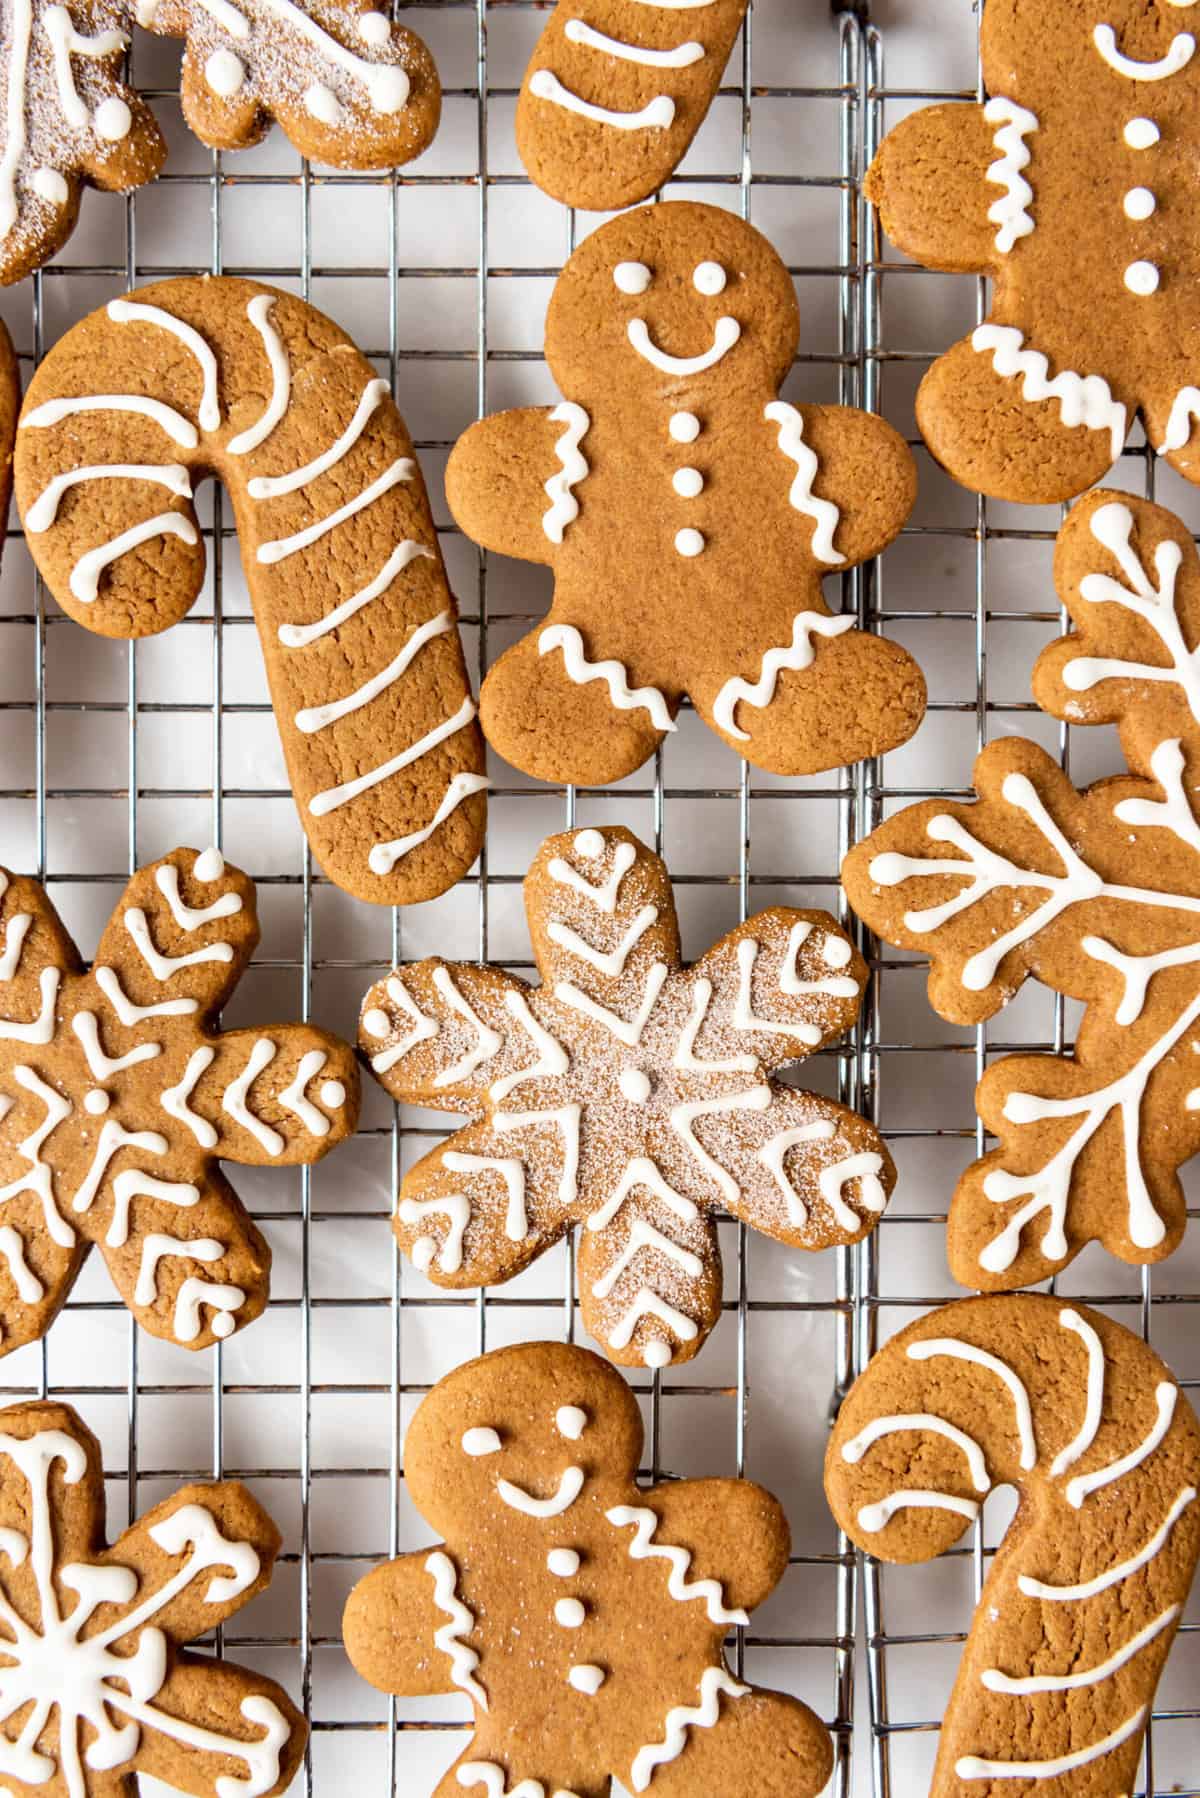 Soft gingerbread cookies cut out like snowflakes, gingerbread men, and candy canes then decorated with easy royal icing.